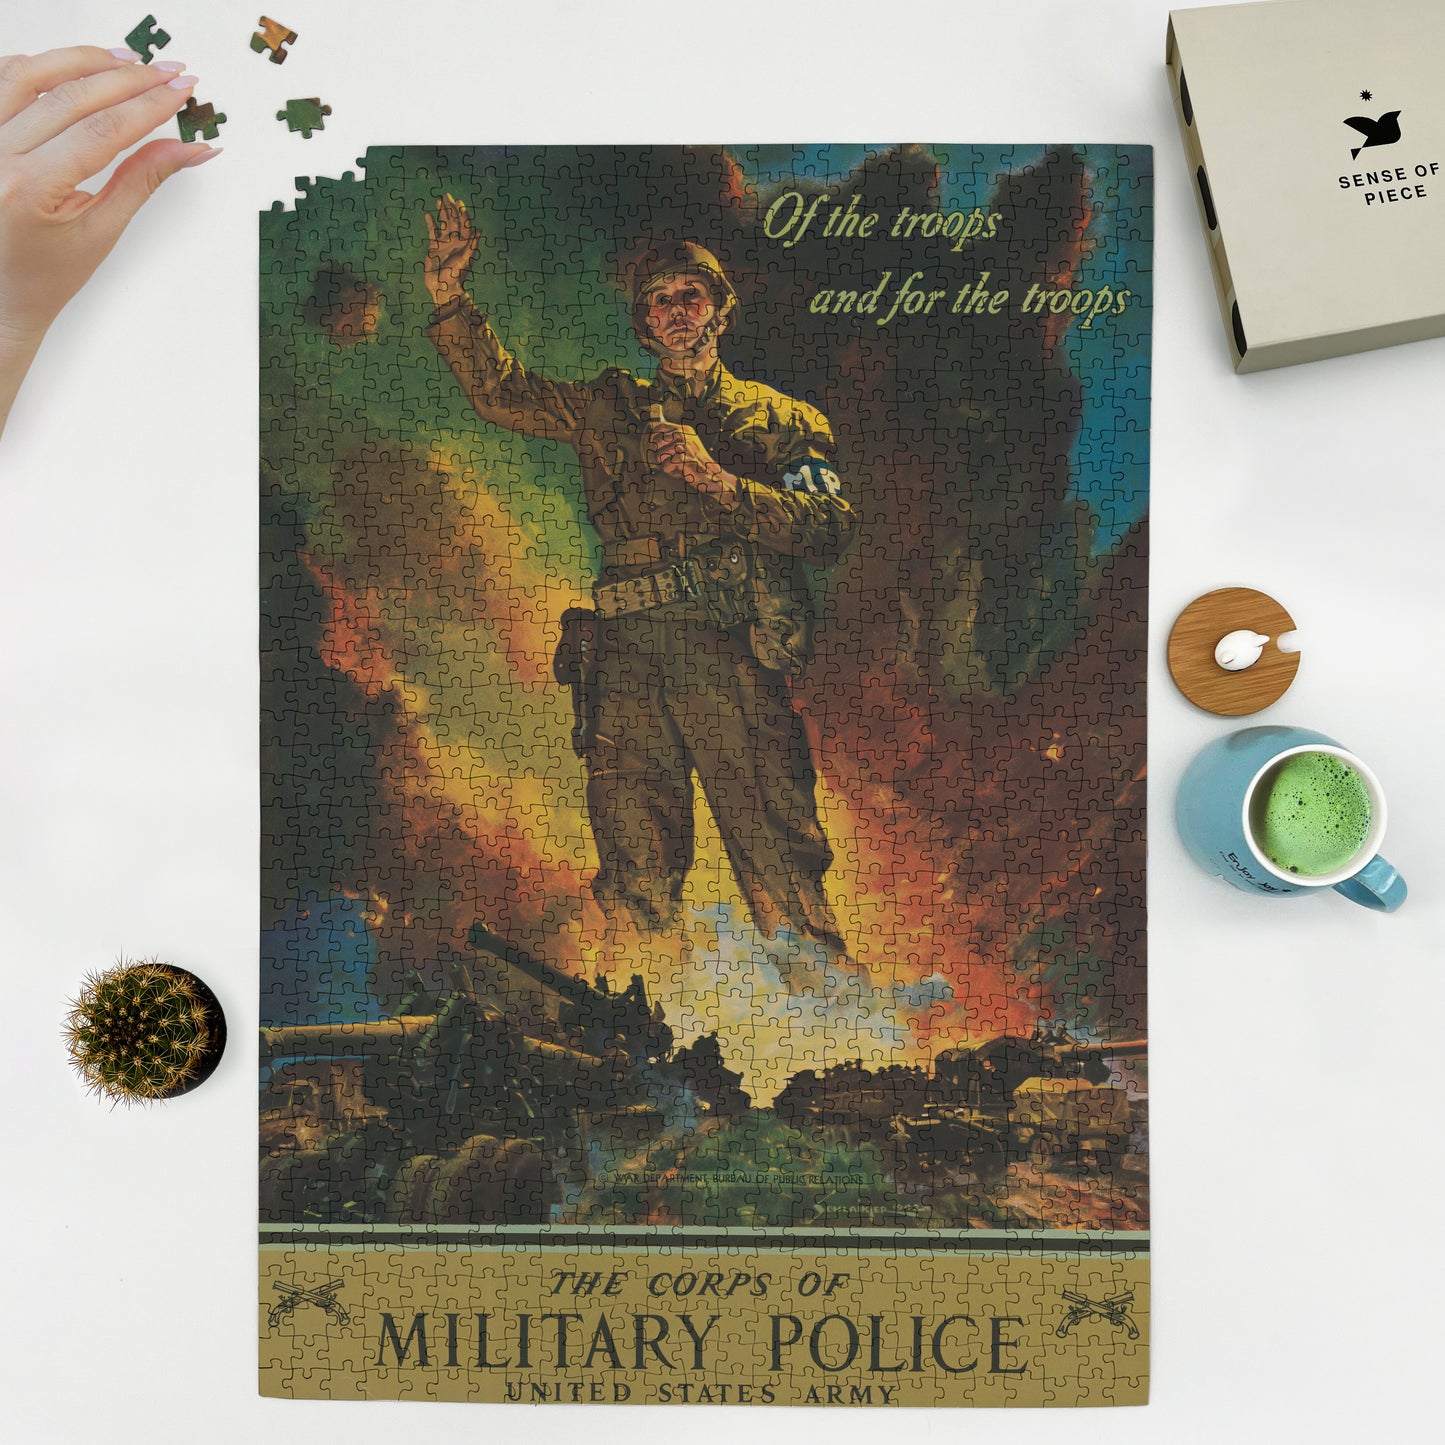 1000 piece puzzle 1942 Of the troops and for the troops  The Corps of military police  United States Army Jes Wilhelm Schlaikjer 